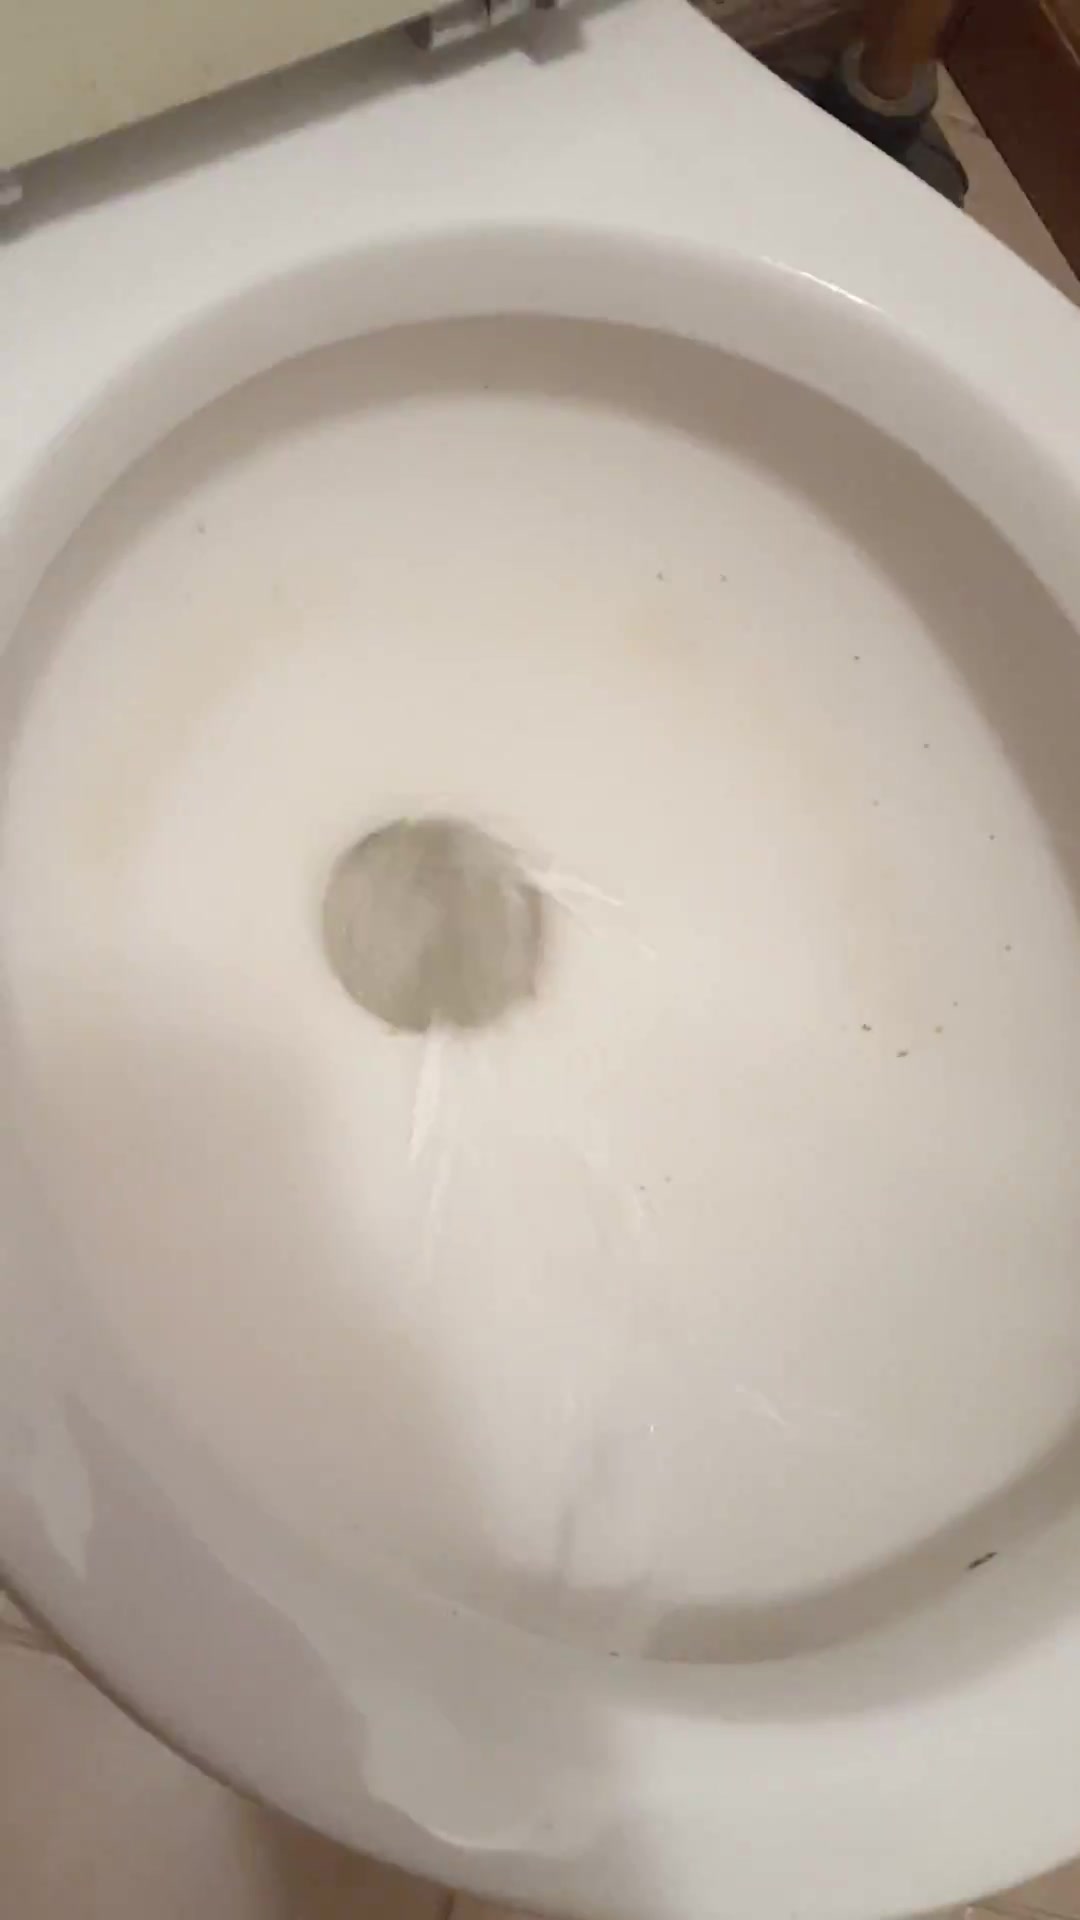 Big shit nearly clogs toilet